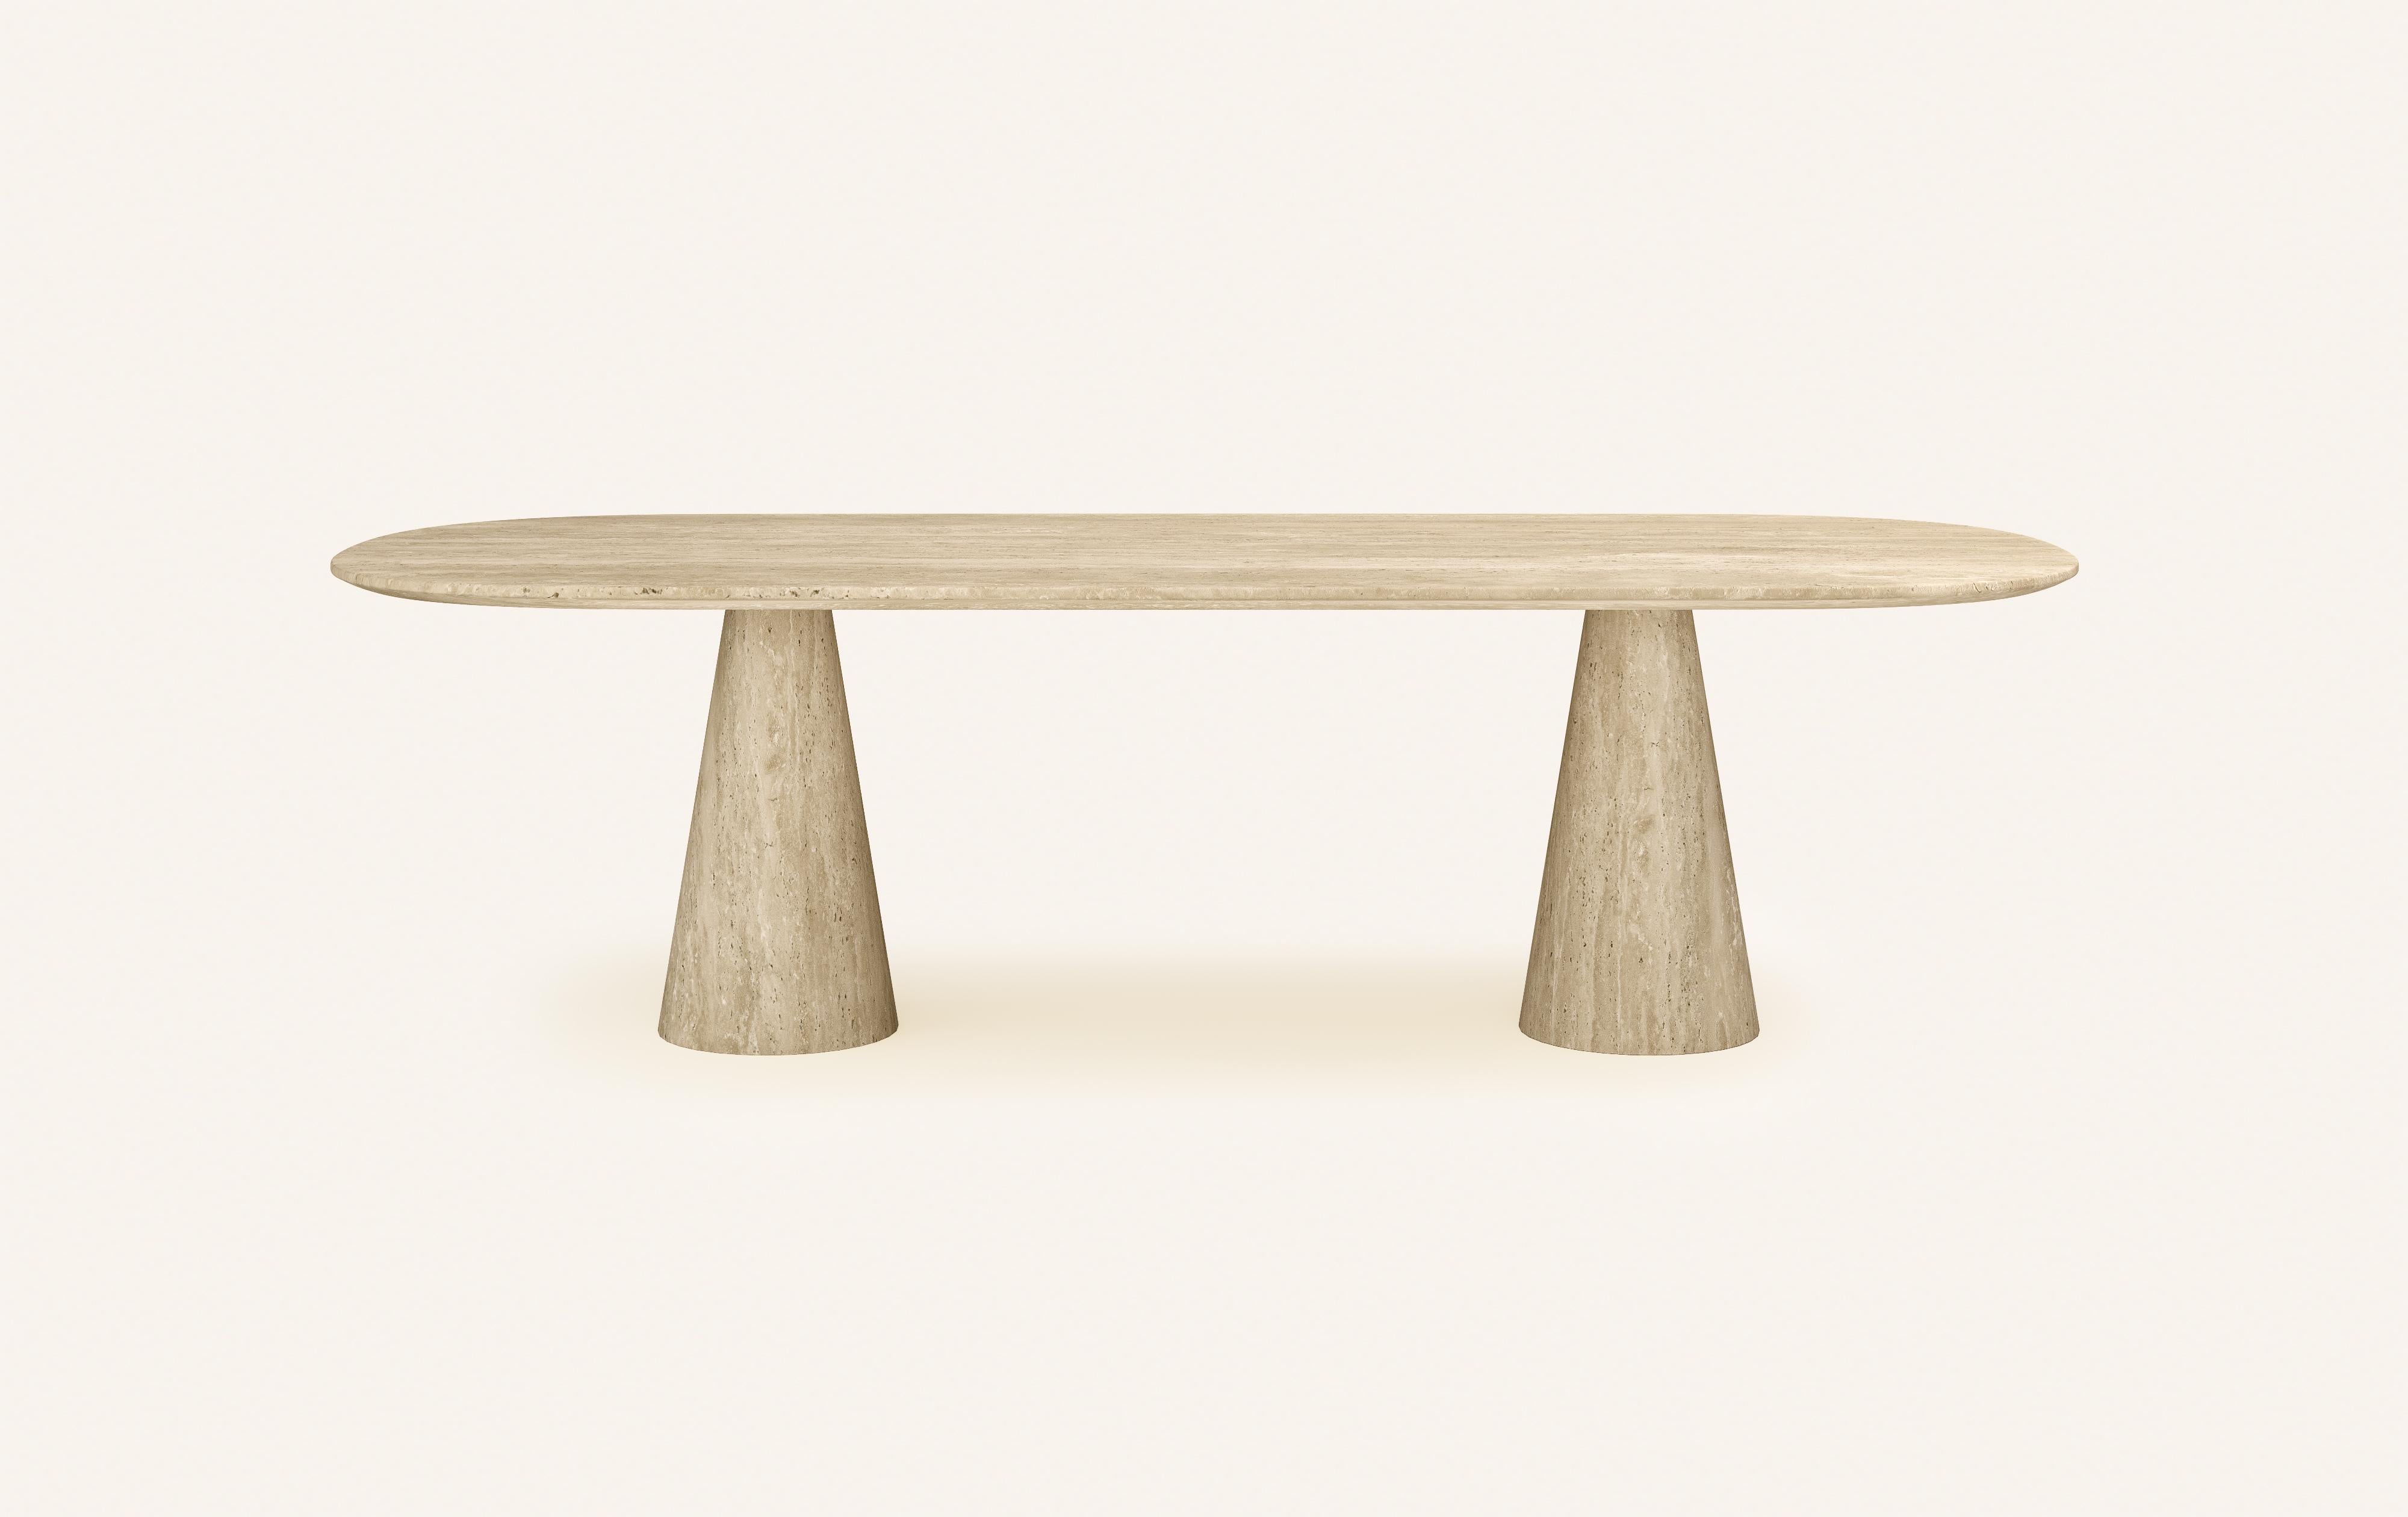 SIMPLISTIC YET MUSCULAR FORMS INFLUENCED BY POST MODERN ITALIAN DESIGN.

DIMENSIONS: 
96”L x 42”W x 30”H: 
- 1.5